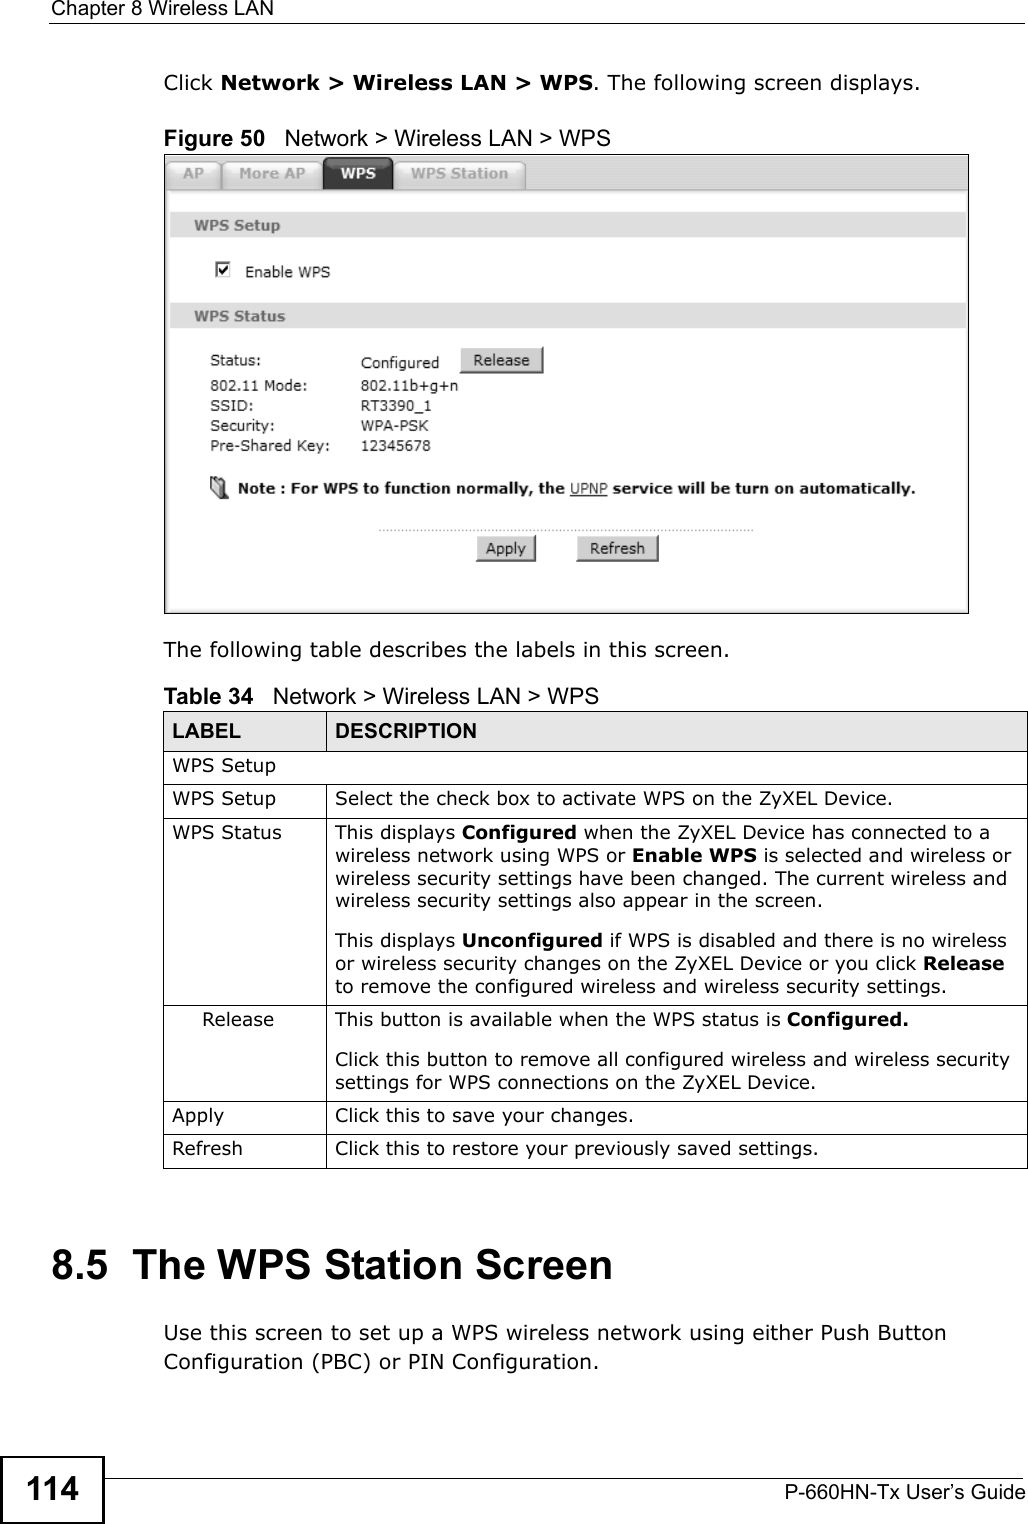 Chapter 8 Wireless LANP-660HN-Tx User’s Guide114Click Network &gt; Wireless LAN &gt; WPS. The following screen displays.Figure 50   Network &gt; Wireless LAN &gt; WPSThe following table describes the labels in this screen.8.5  The WPS Station ScreenUse this screen to set up a WPS wireless network using either Push Button Configuration (PBC) or PIN Configuration.Table 34   Network &gt; Wireless LAN &gt; WPSLABEL DESCRIPTIONWPS SetupWPS Setup Select the check box to activate WPS on the ZyXEL Device.WPS Status This displays Configured when the ZyXEL Device has connected to a wireless network using WPS or Enable WPS is selected and wireless or wireless security settings have been changed. The current wireless and wireless security settings also appear in the screen.This displays Unconfigured if WPS is disabled and there is no wireless or wireless security changes on the ZyXEL Device or you click Release to remove the configured wireless and wireless security settings.Release This button is available when the WPS status is Configured.Click this button to remove all configured wireless and wireless security settings for WPS connections on the ZyXEL Device.Apply Click this to save your changes.Refresh Click this to restore your previously saved settings.